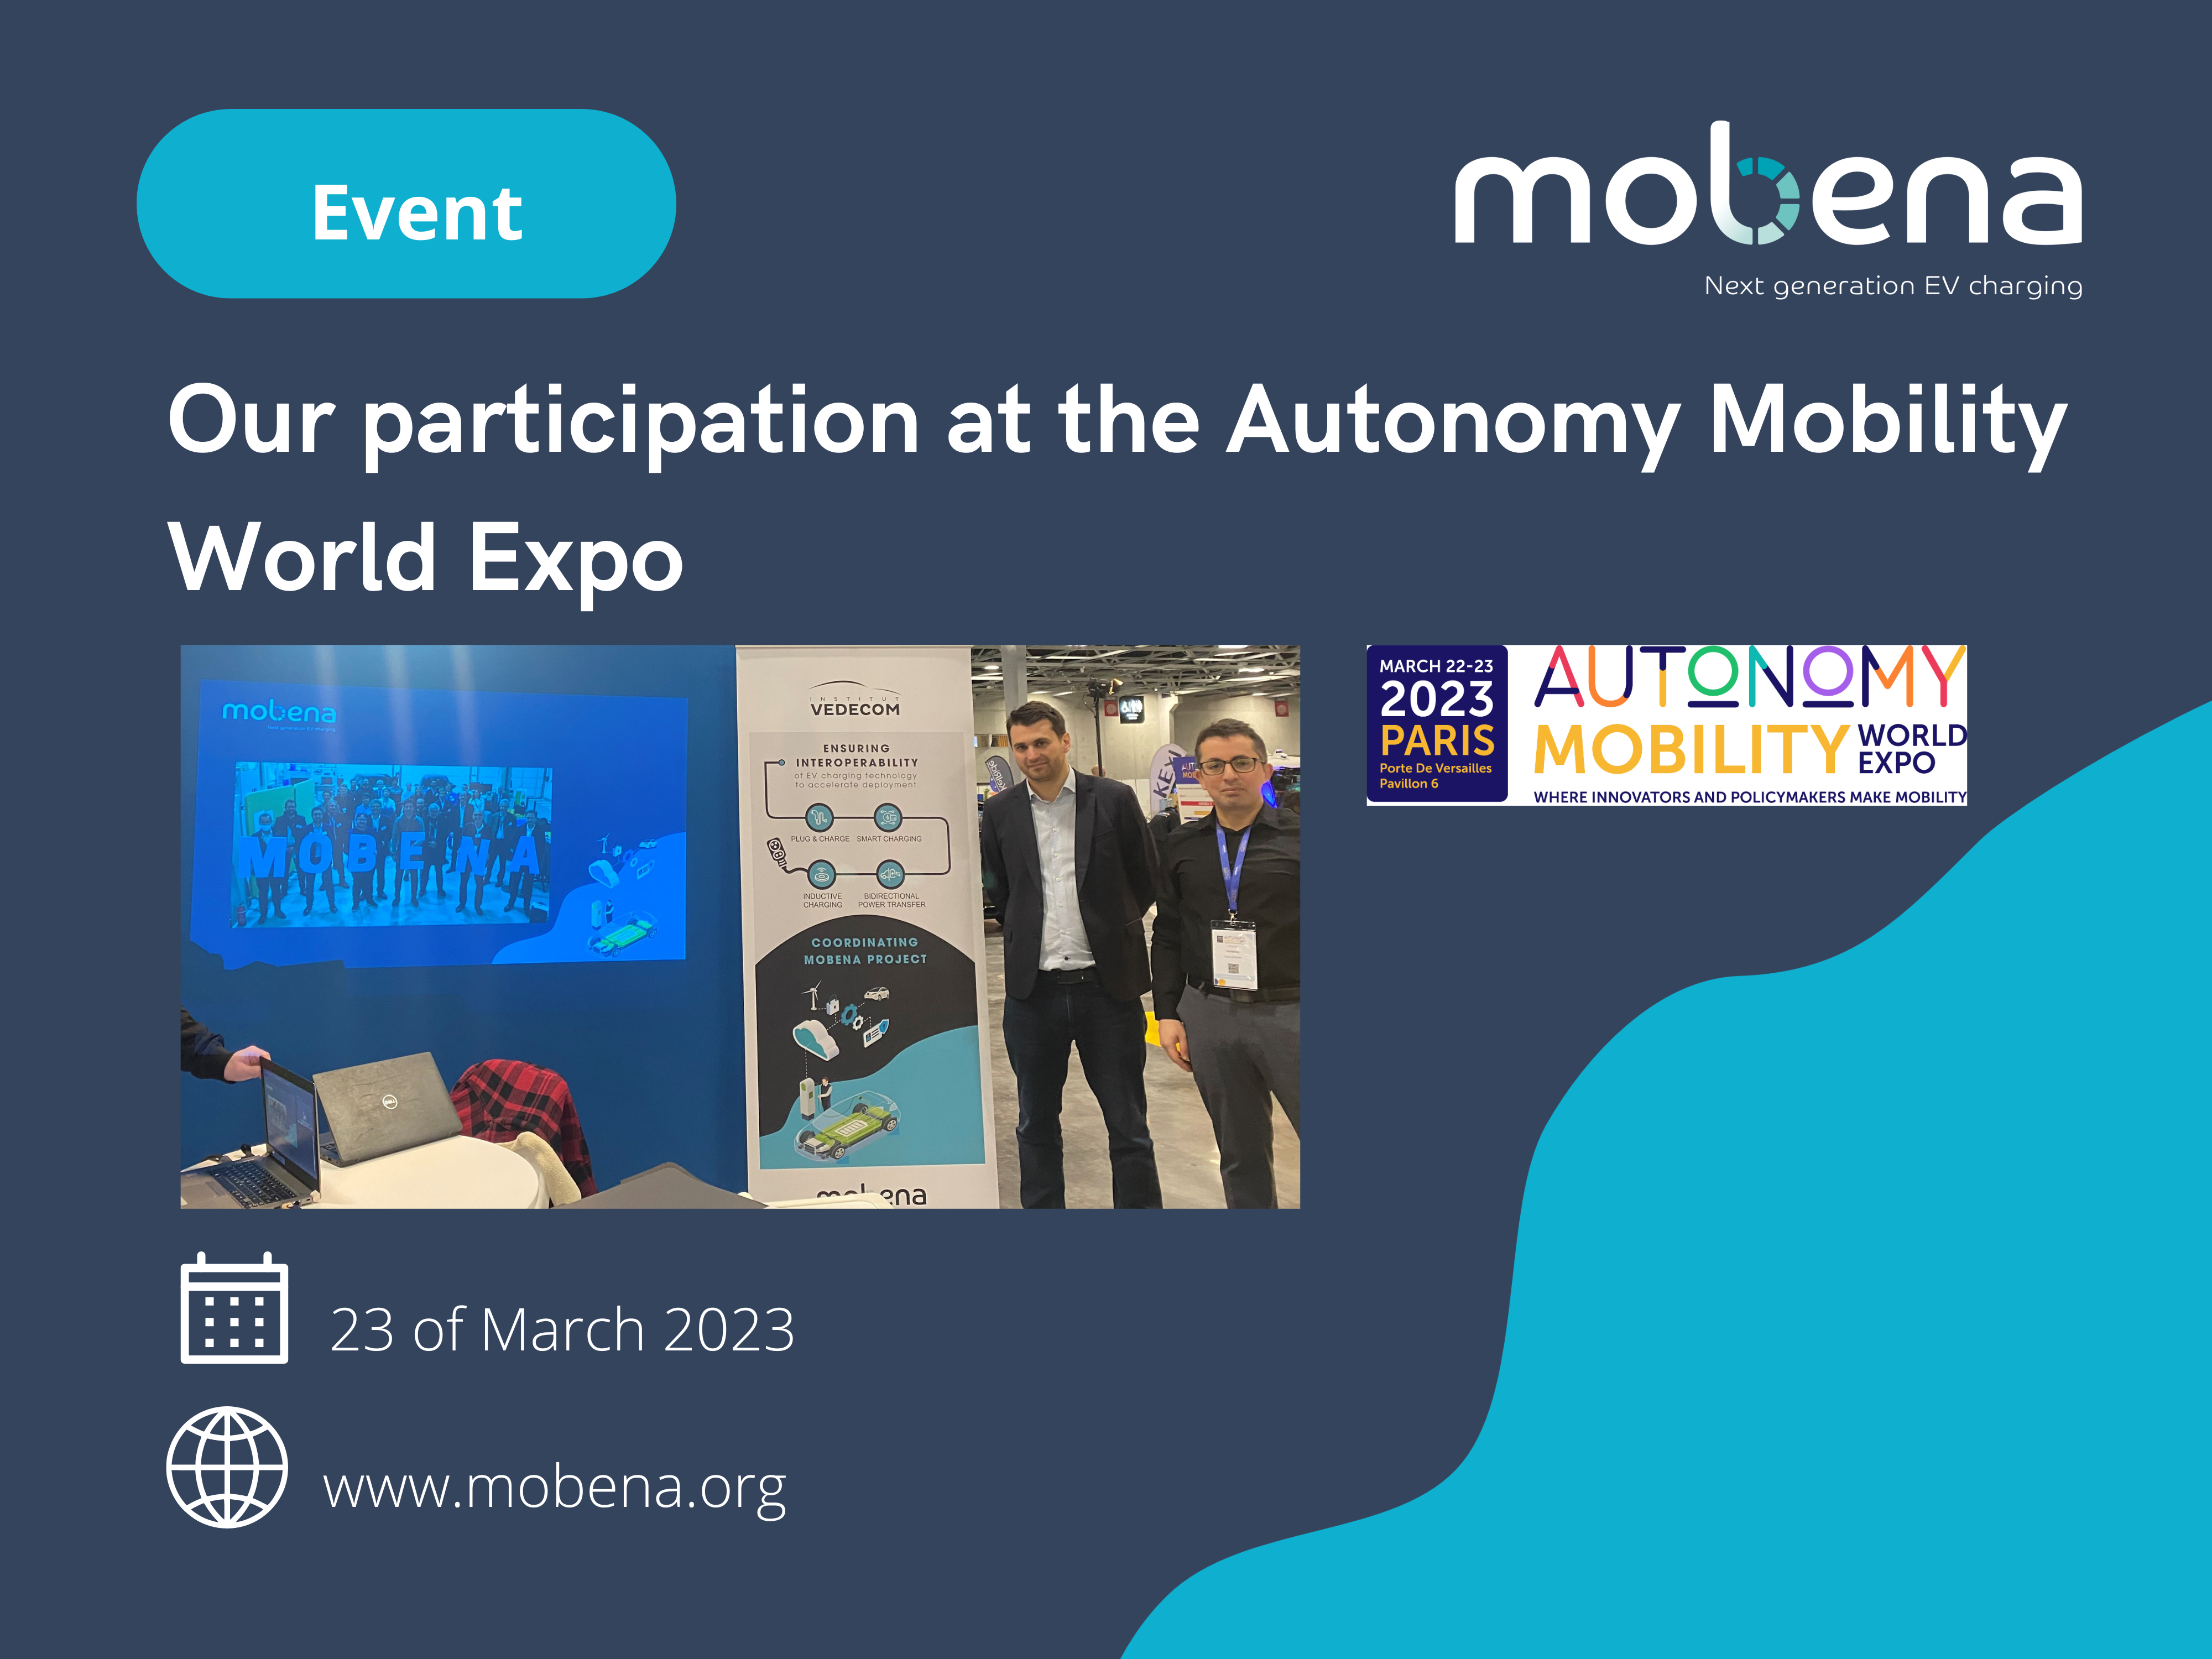 Our participation at the Autonomy Mobility World Expo